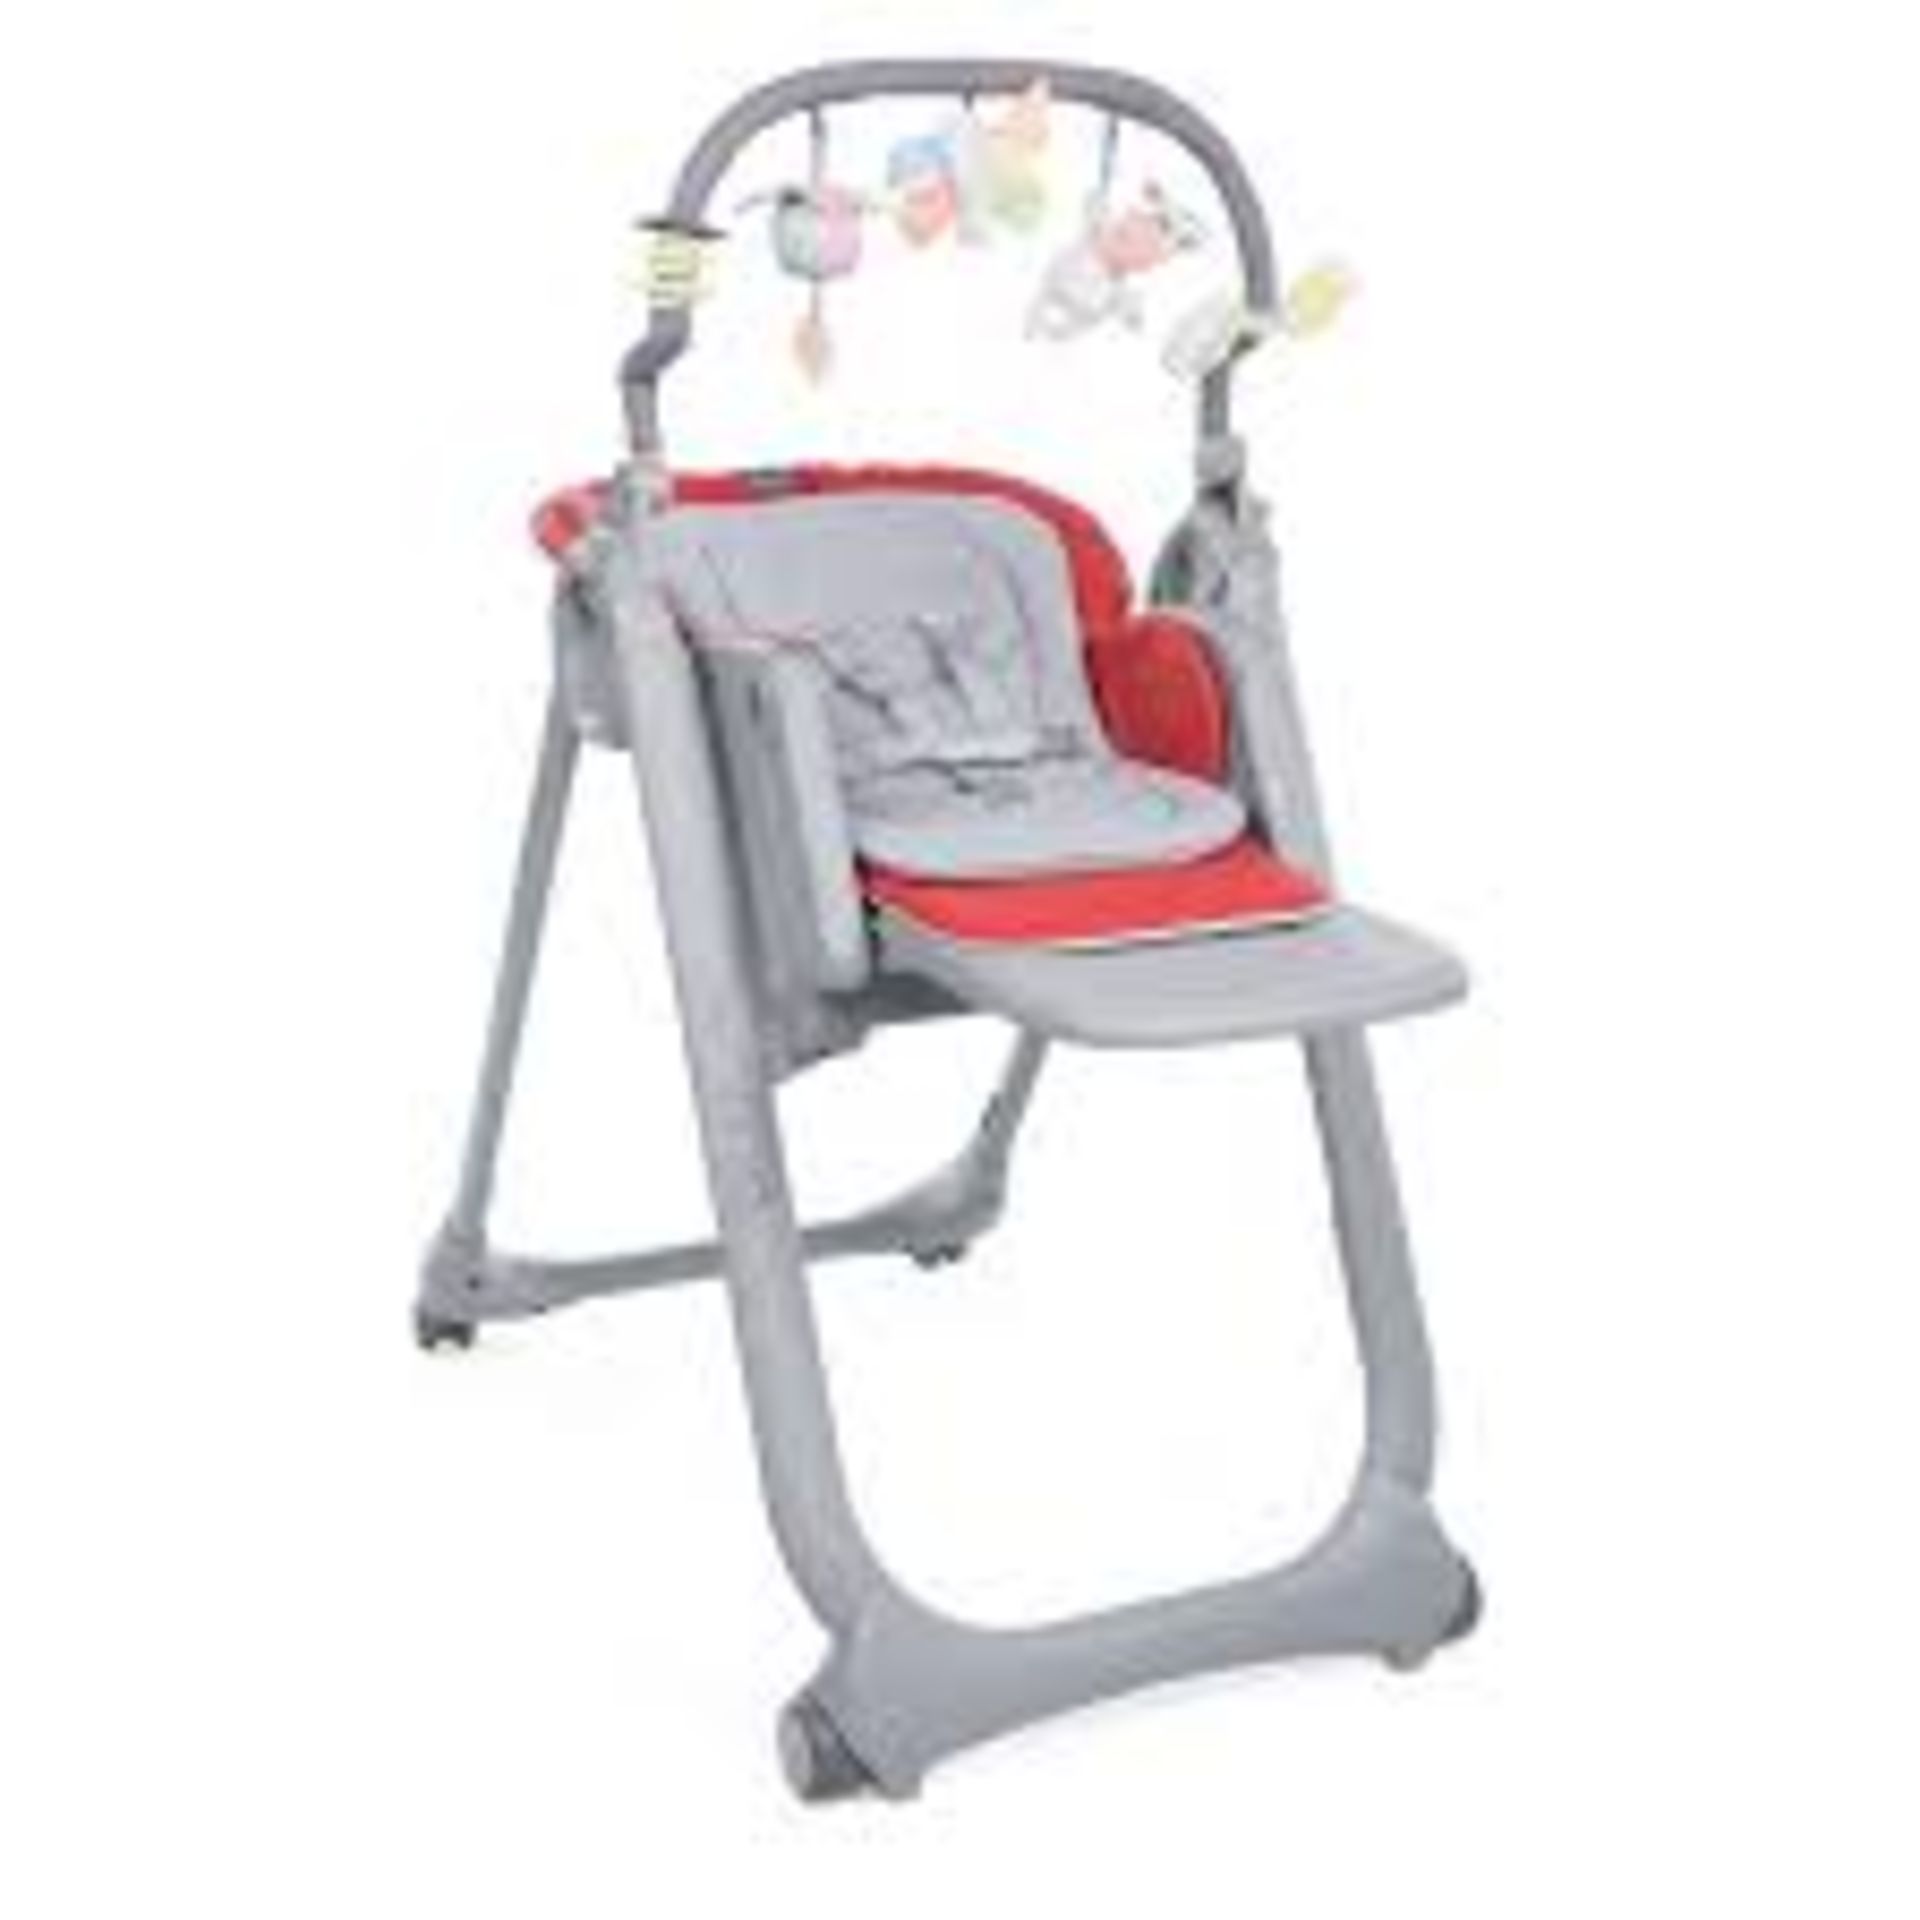 Boxed Chicco Poly Magic Relax High Chair RRP £140 (4033670) (Public Viewing & Appraisals Available)